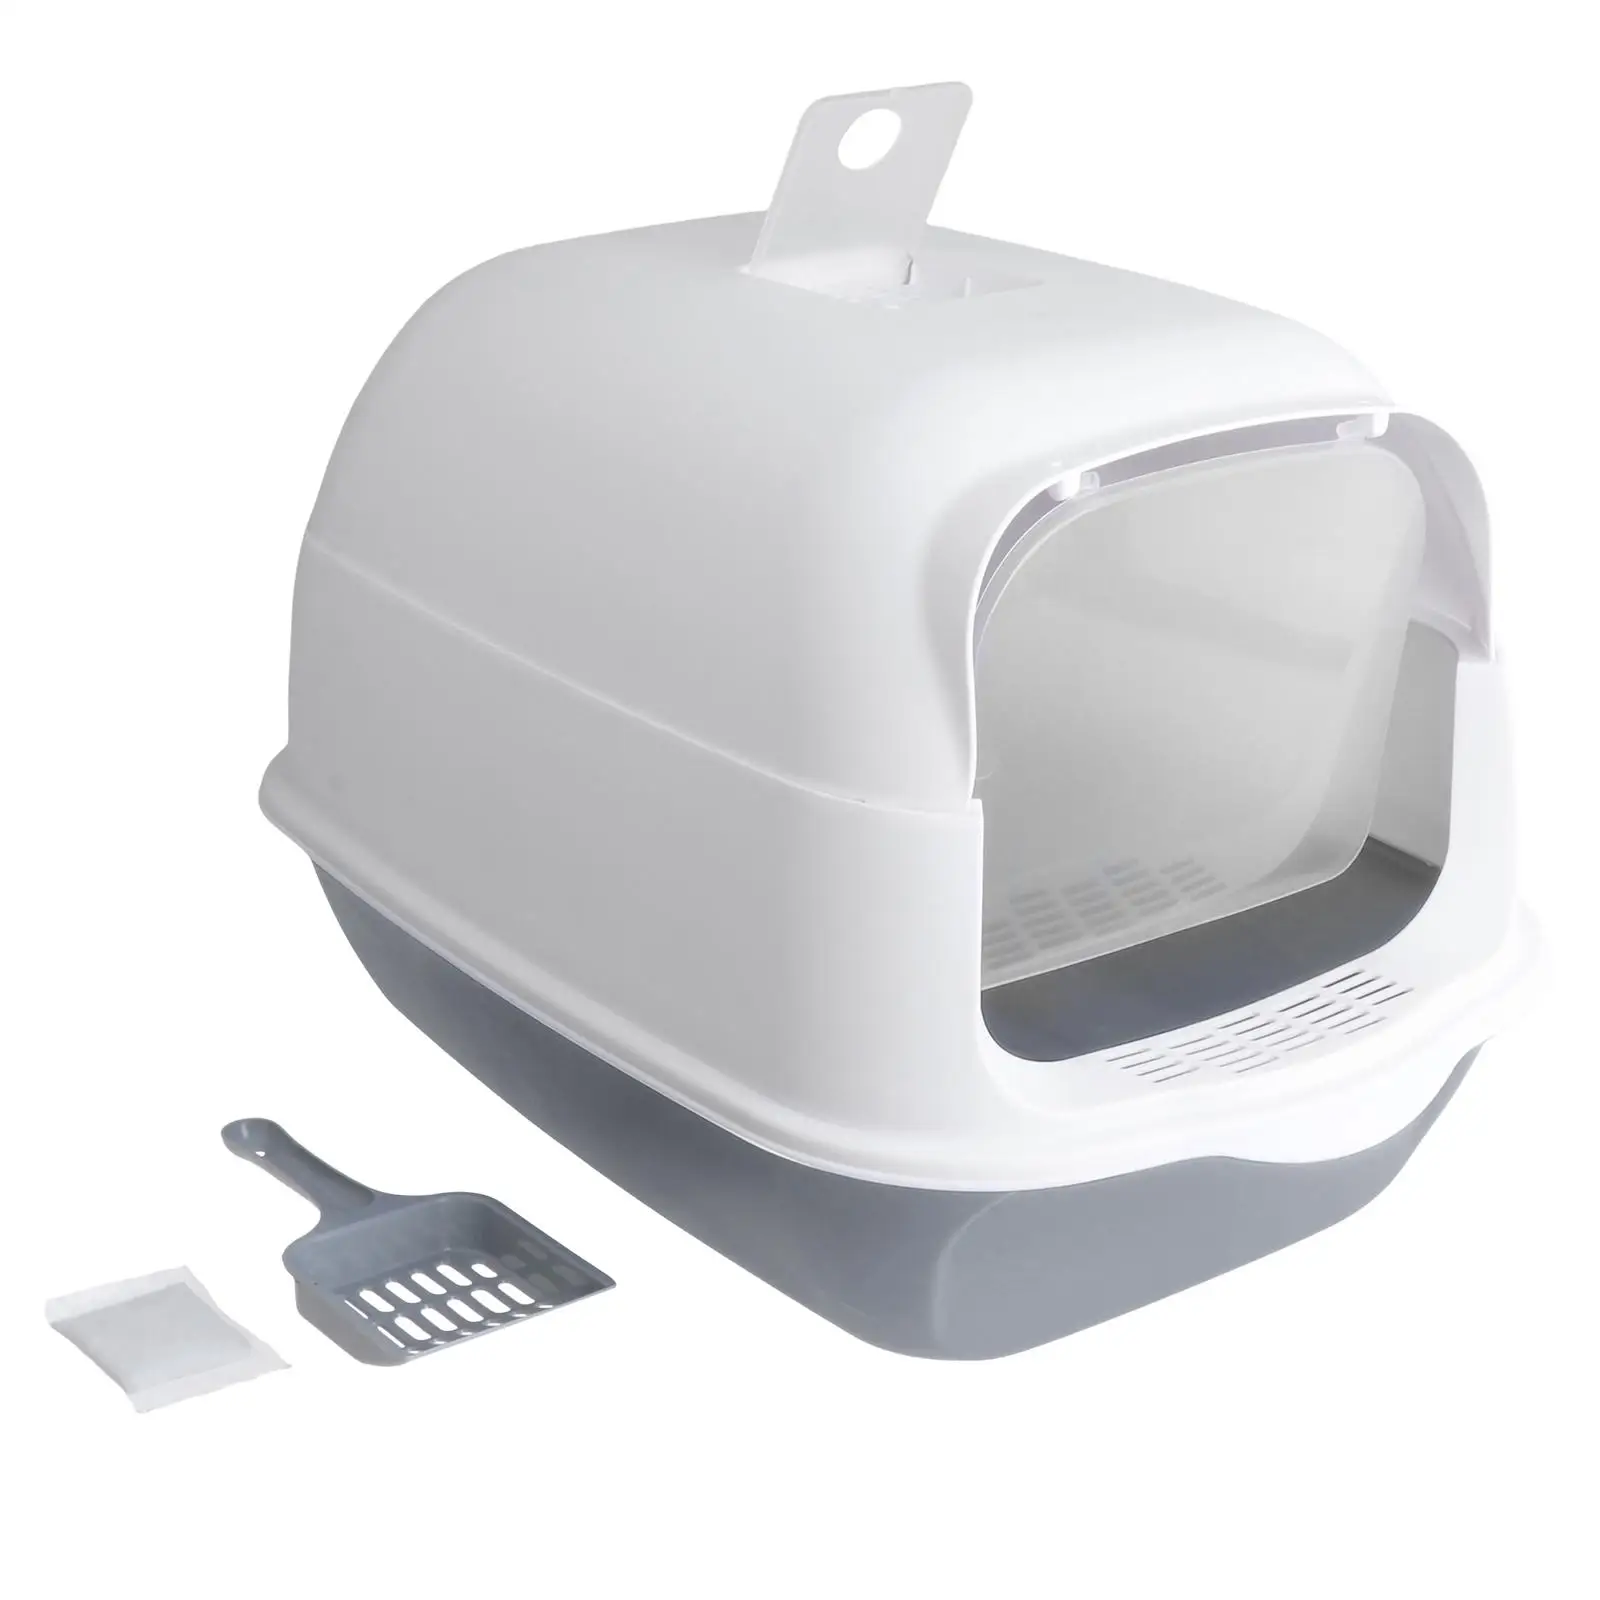 Hooded Cat Litter Box with Lid Enclosed Cat Toilet Reusable Kitten Potty